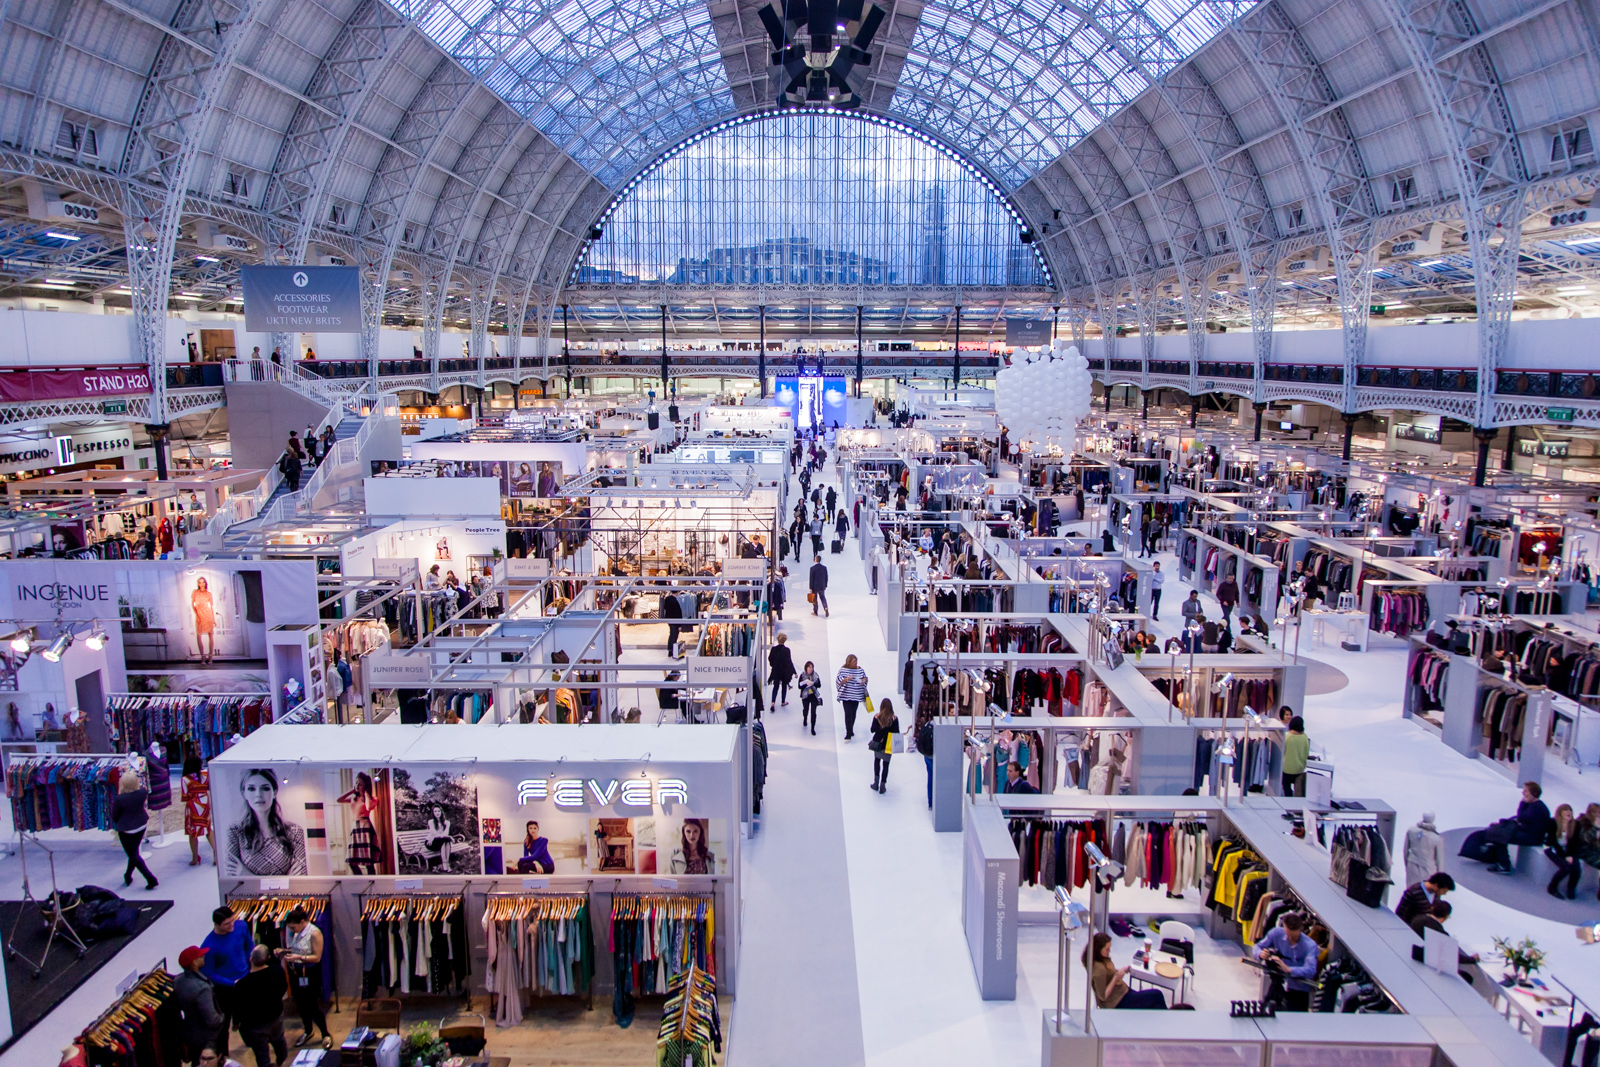 Are you going to Pure London this February? Retail IT